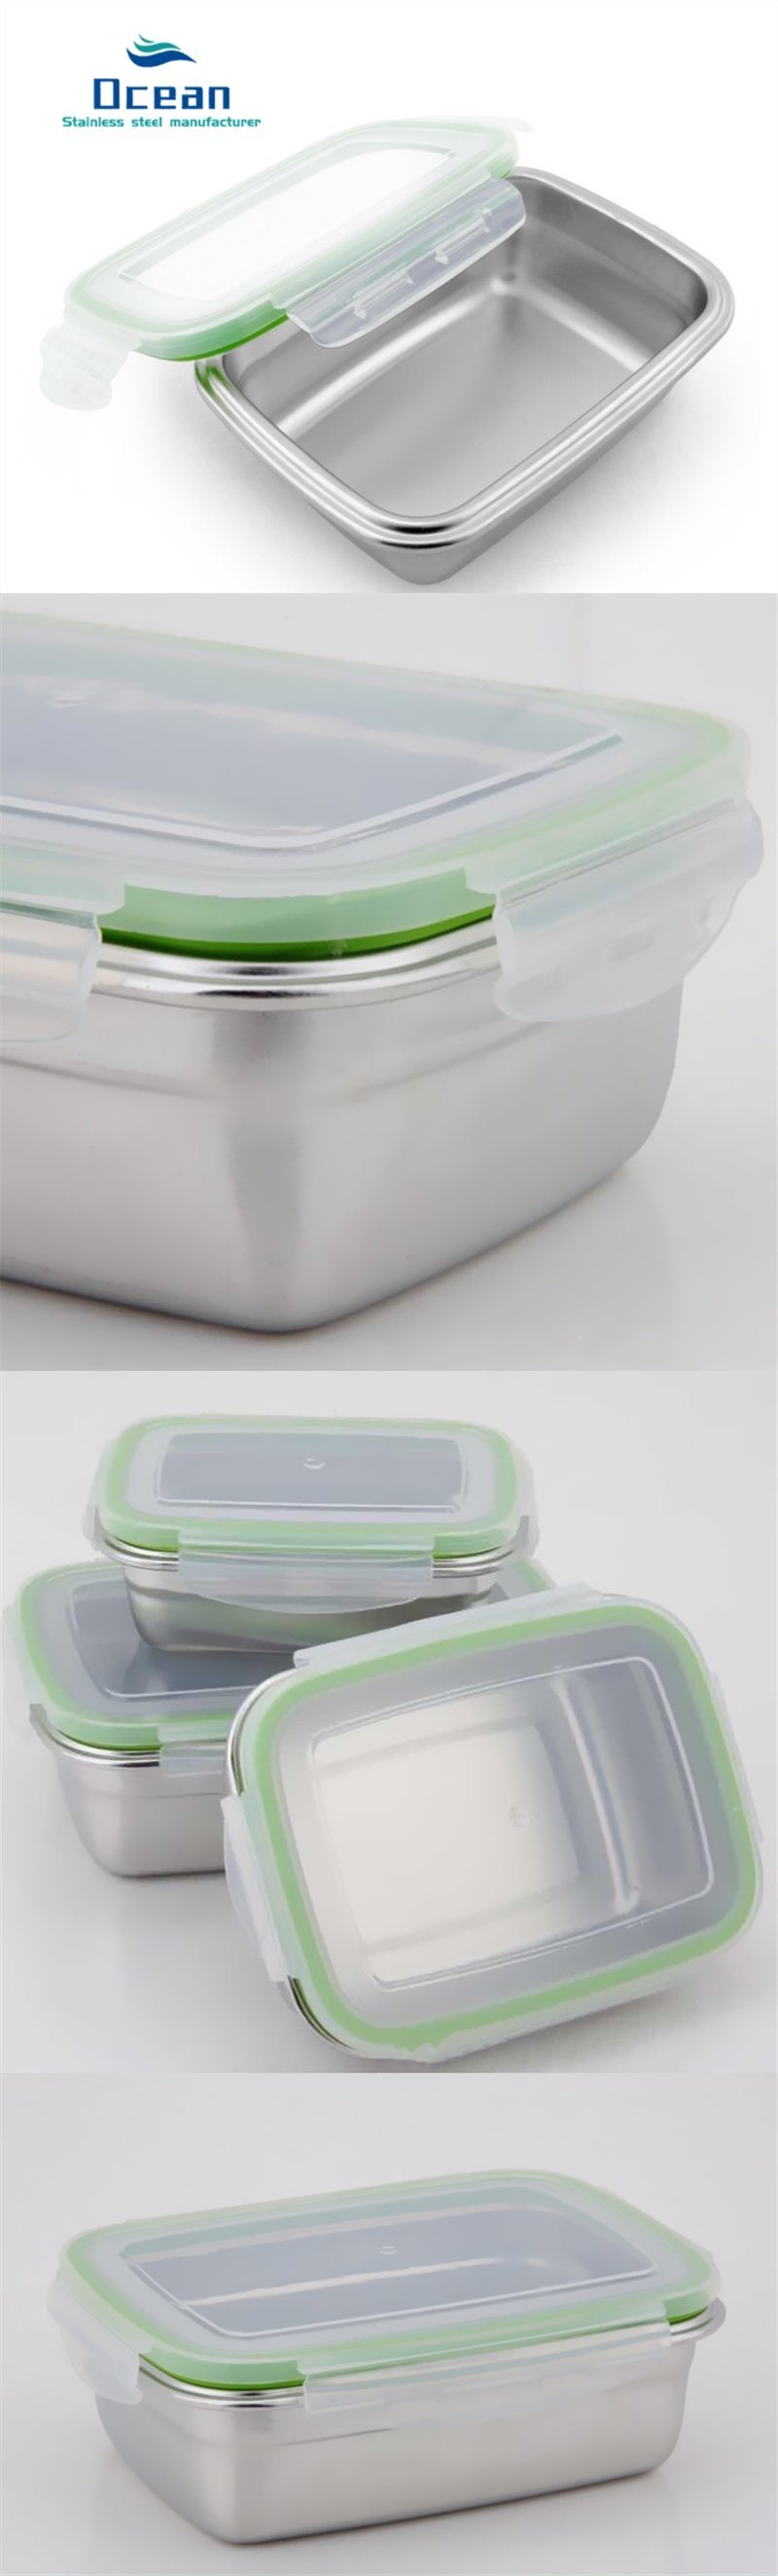 Korean Style 201 Stainless Steel Bento Box Seal Food Storage Container (5)